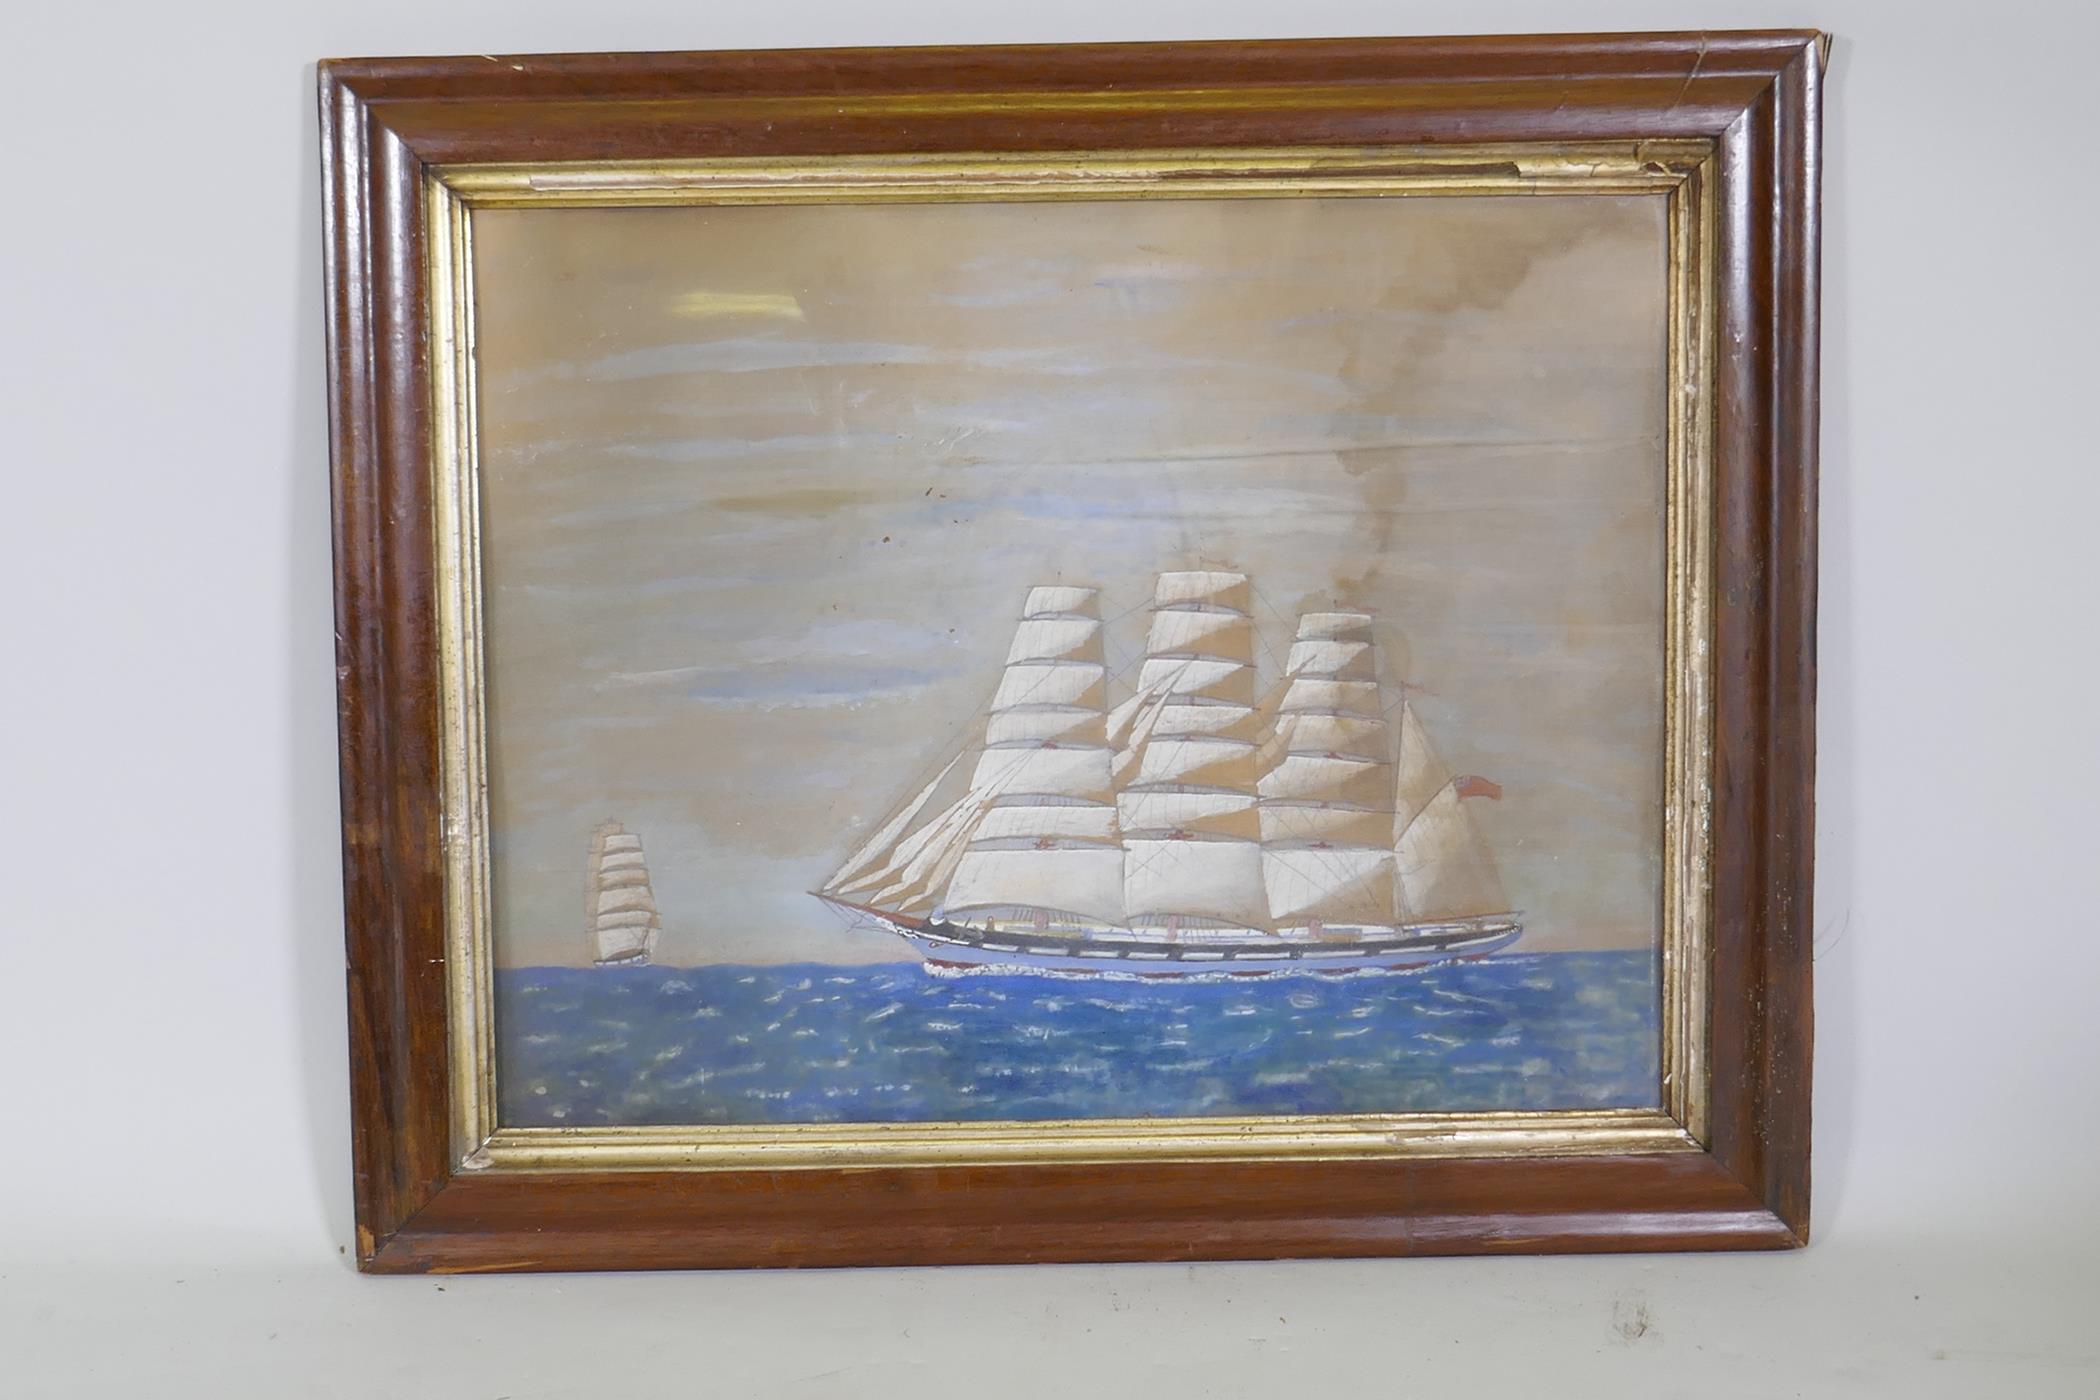 Naive painting of a three masted clipper sailing ship, unsigned, watercolour on card, 70 x 55cm